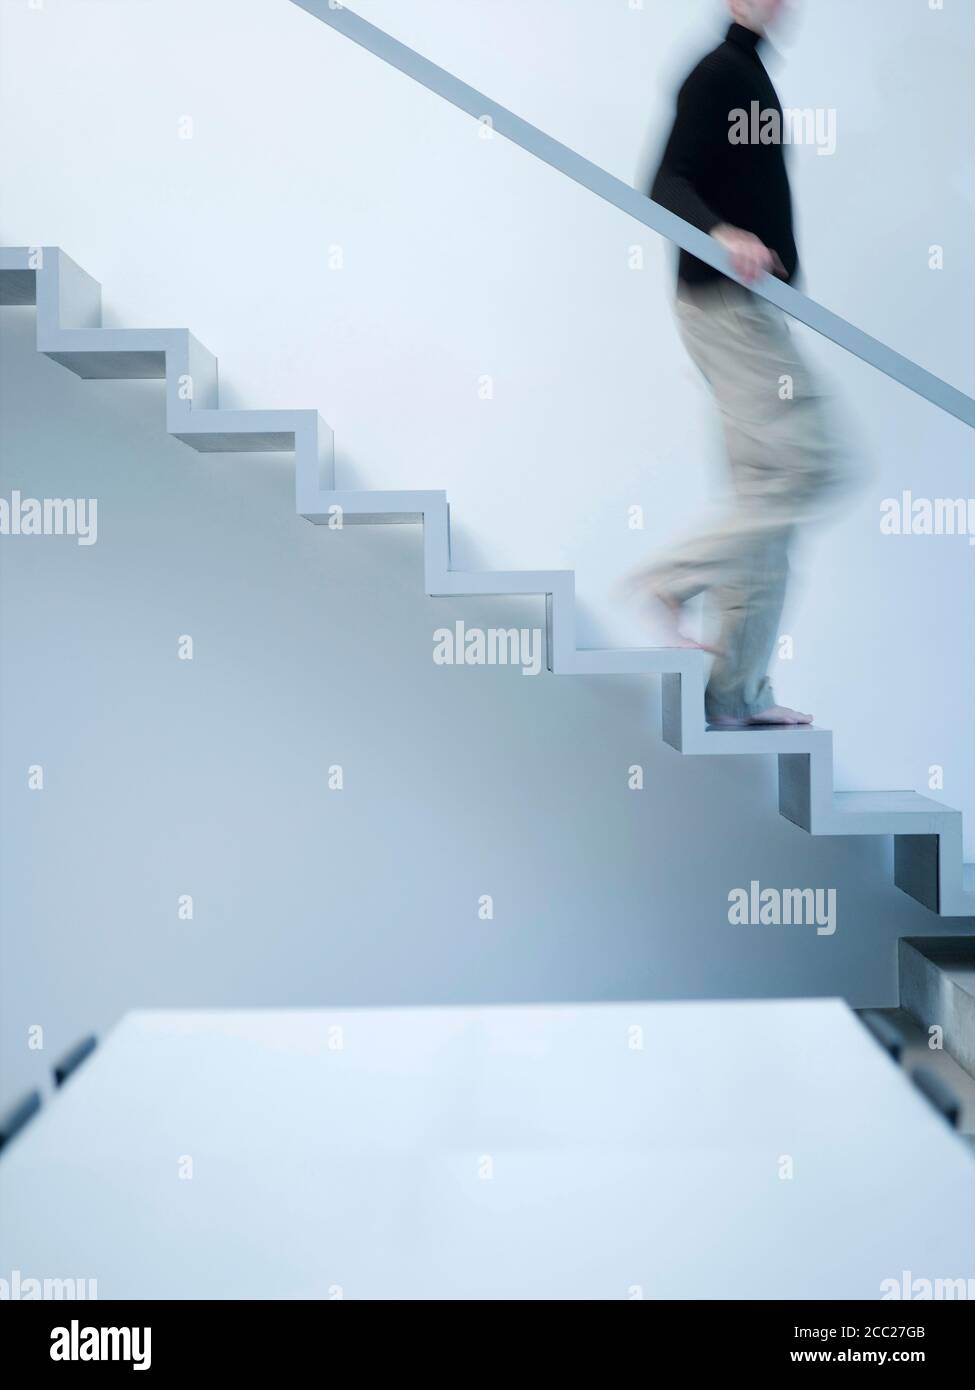 Man moving down stairs, side view Stock Photo